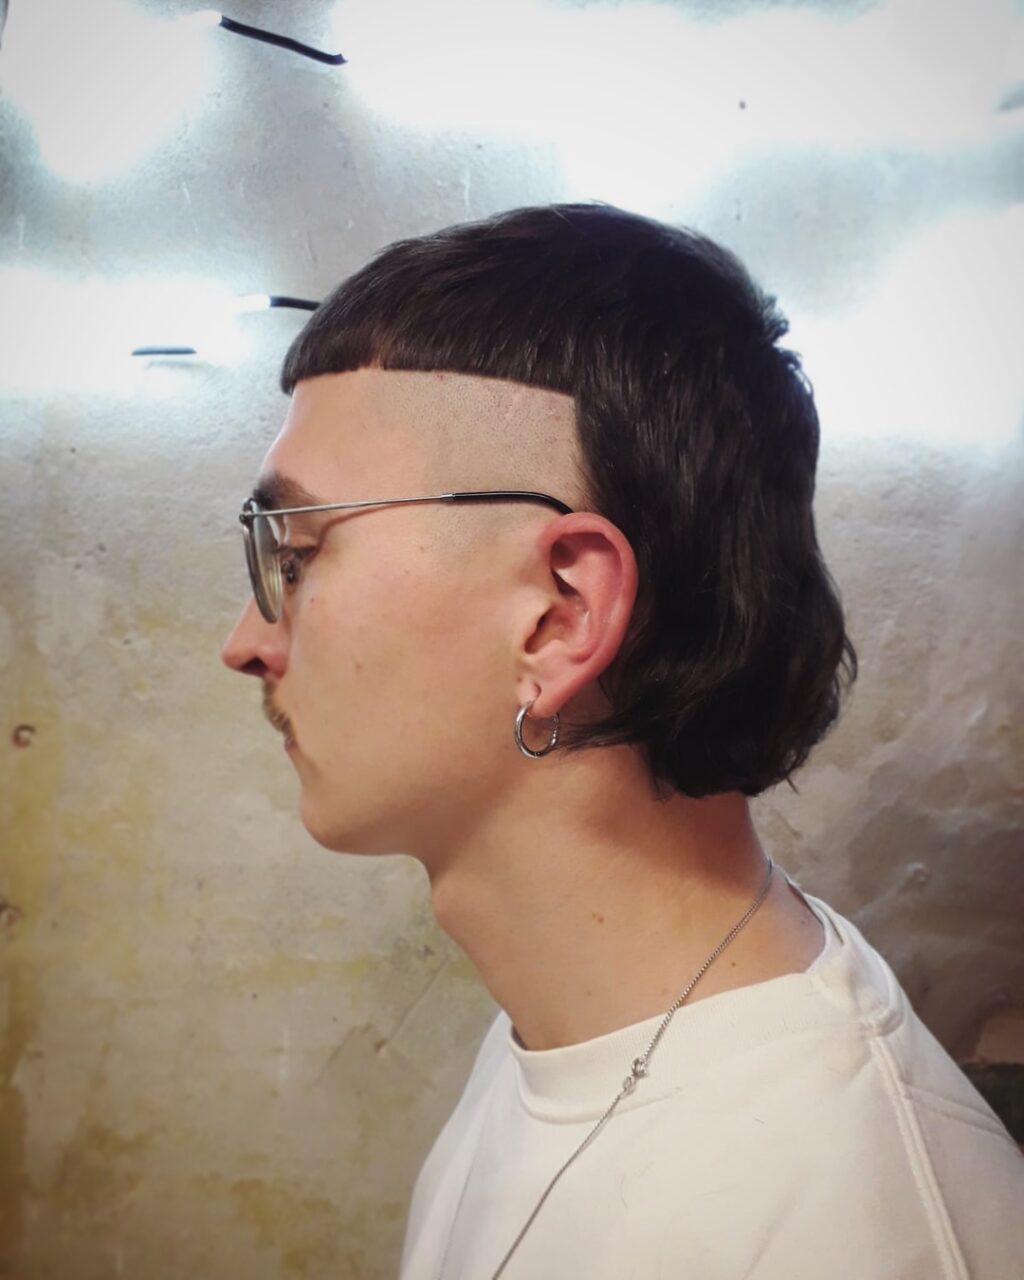 Sharp mullet haircut with shaved sides in Moabit, Berlin